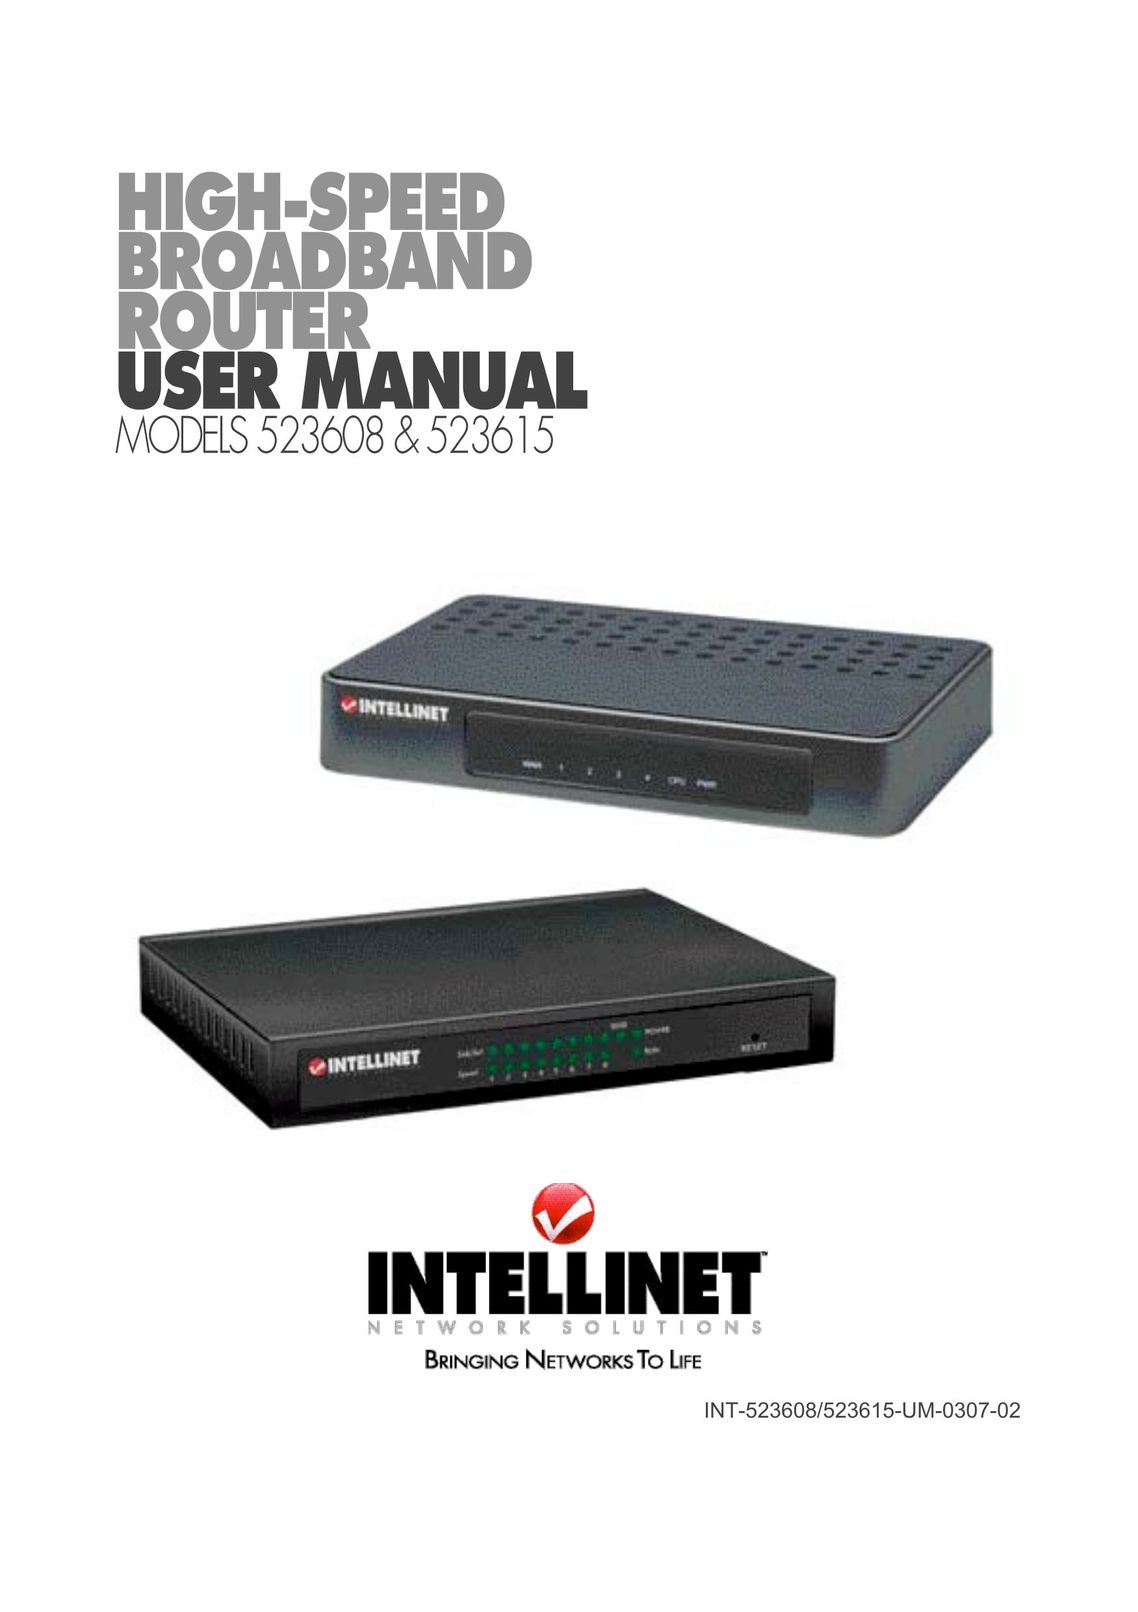 Intellinet Network Solutions 523615 Network Router User Manual